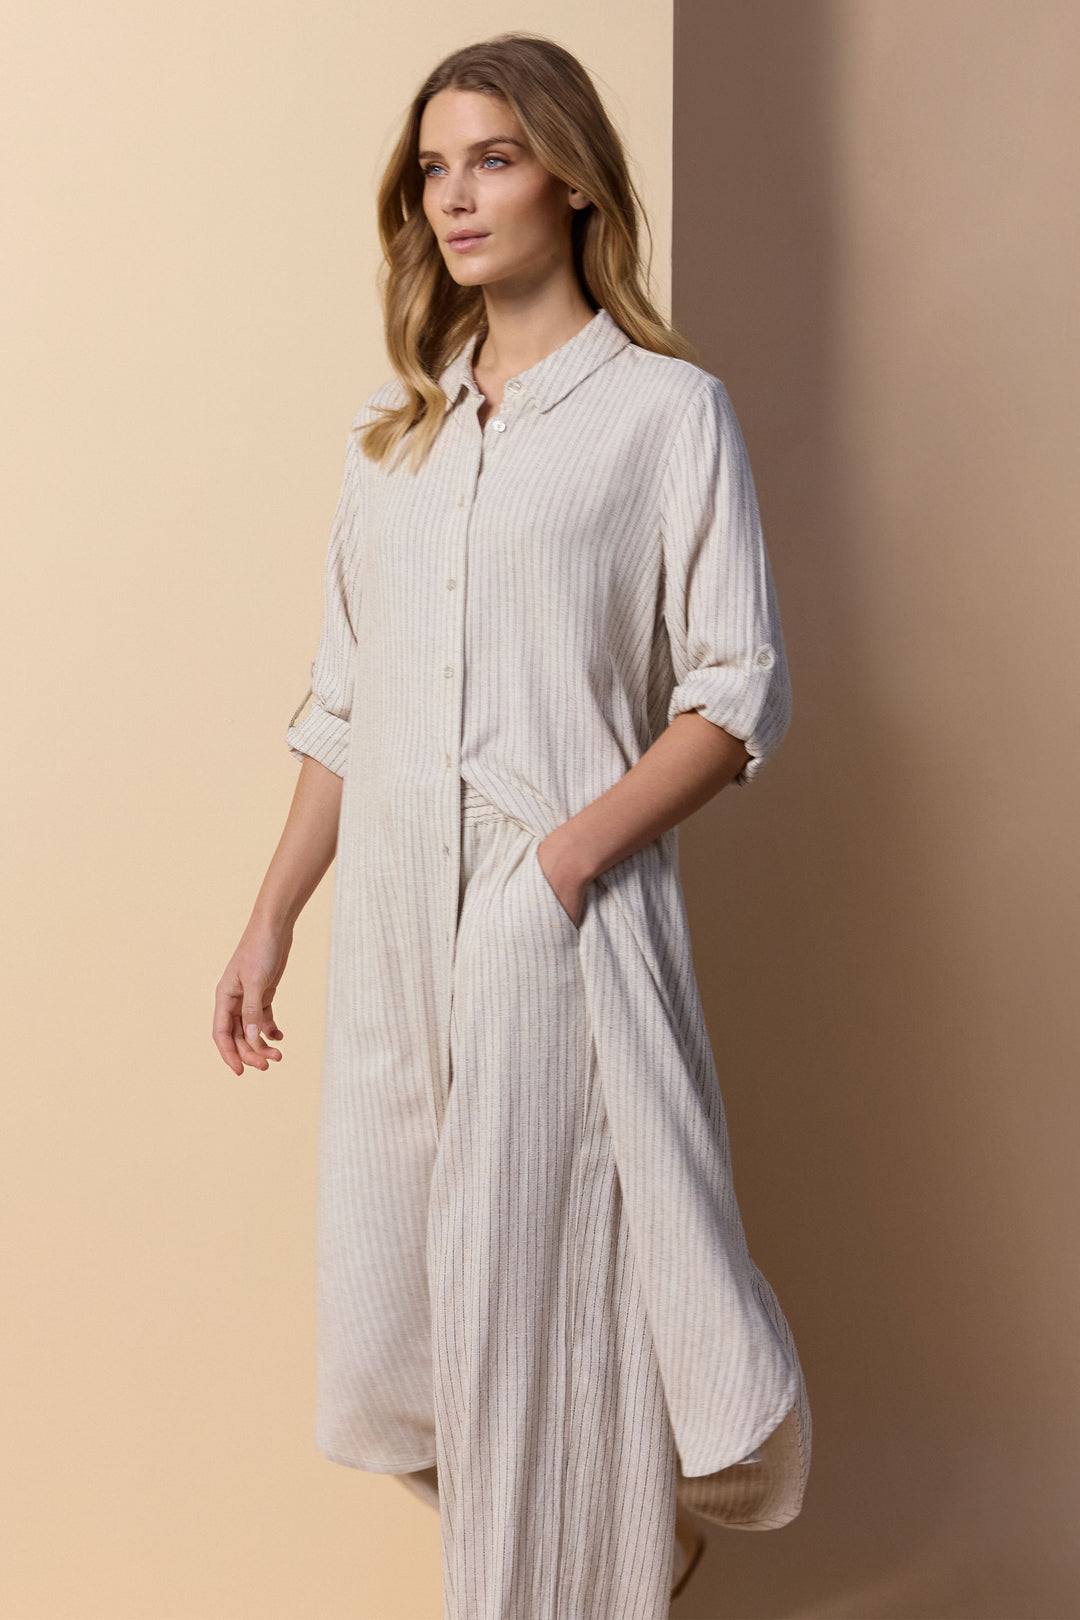 Soya Concept Spring 2024 The blend of soft viscose and linen make it perfect for warm weather. With a classic collar and relaxed fit, it's both comfortable and stylish.